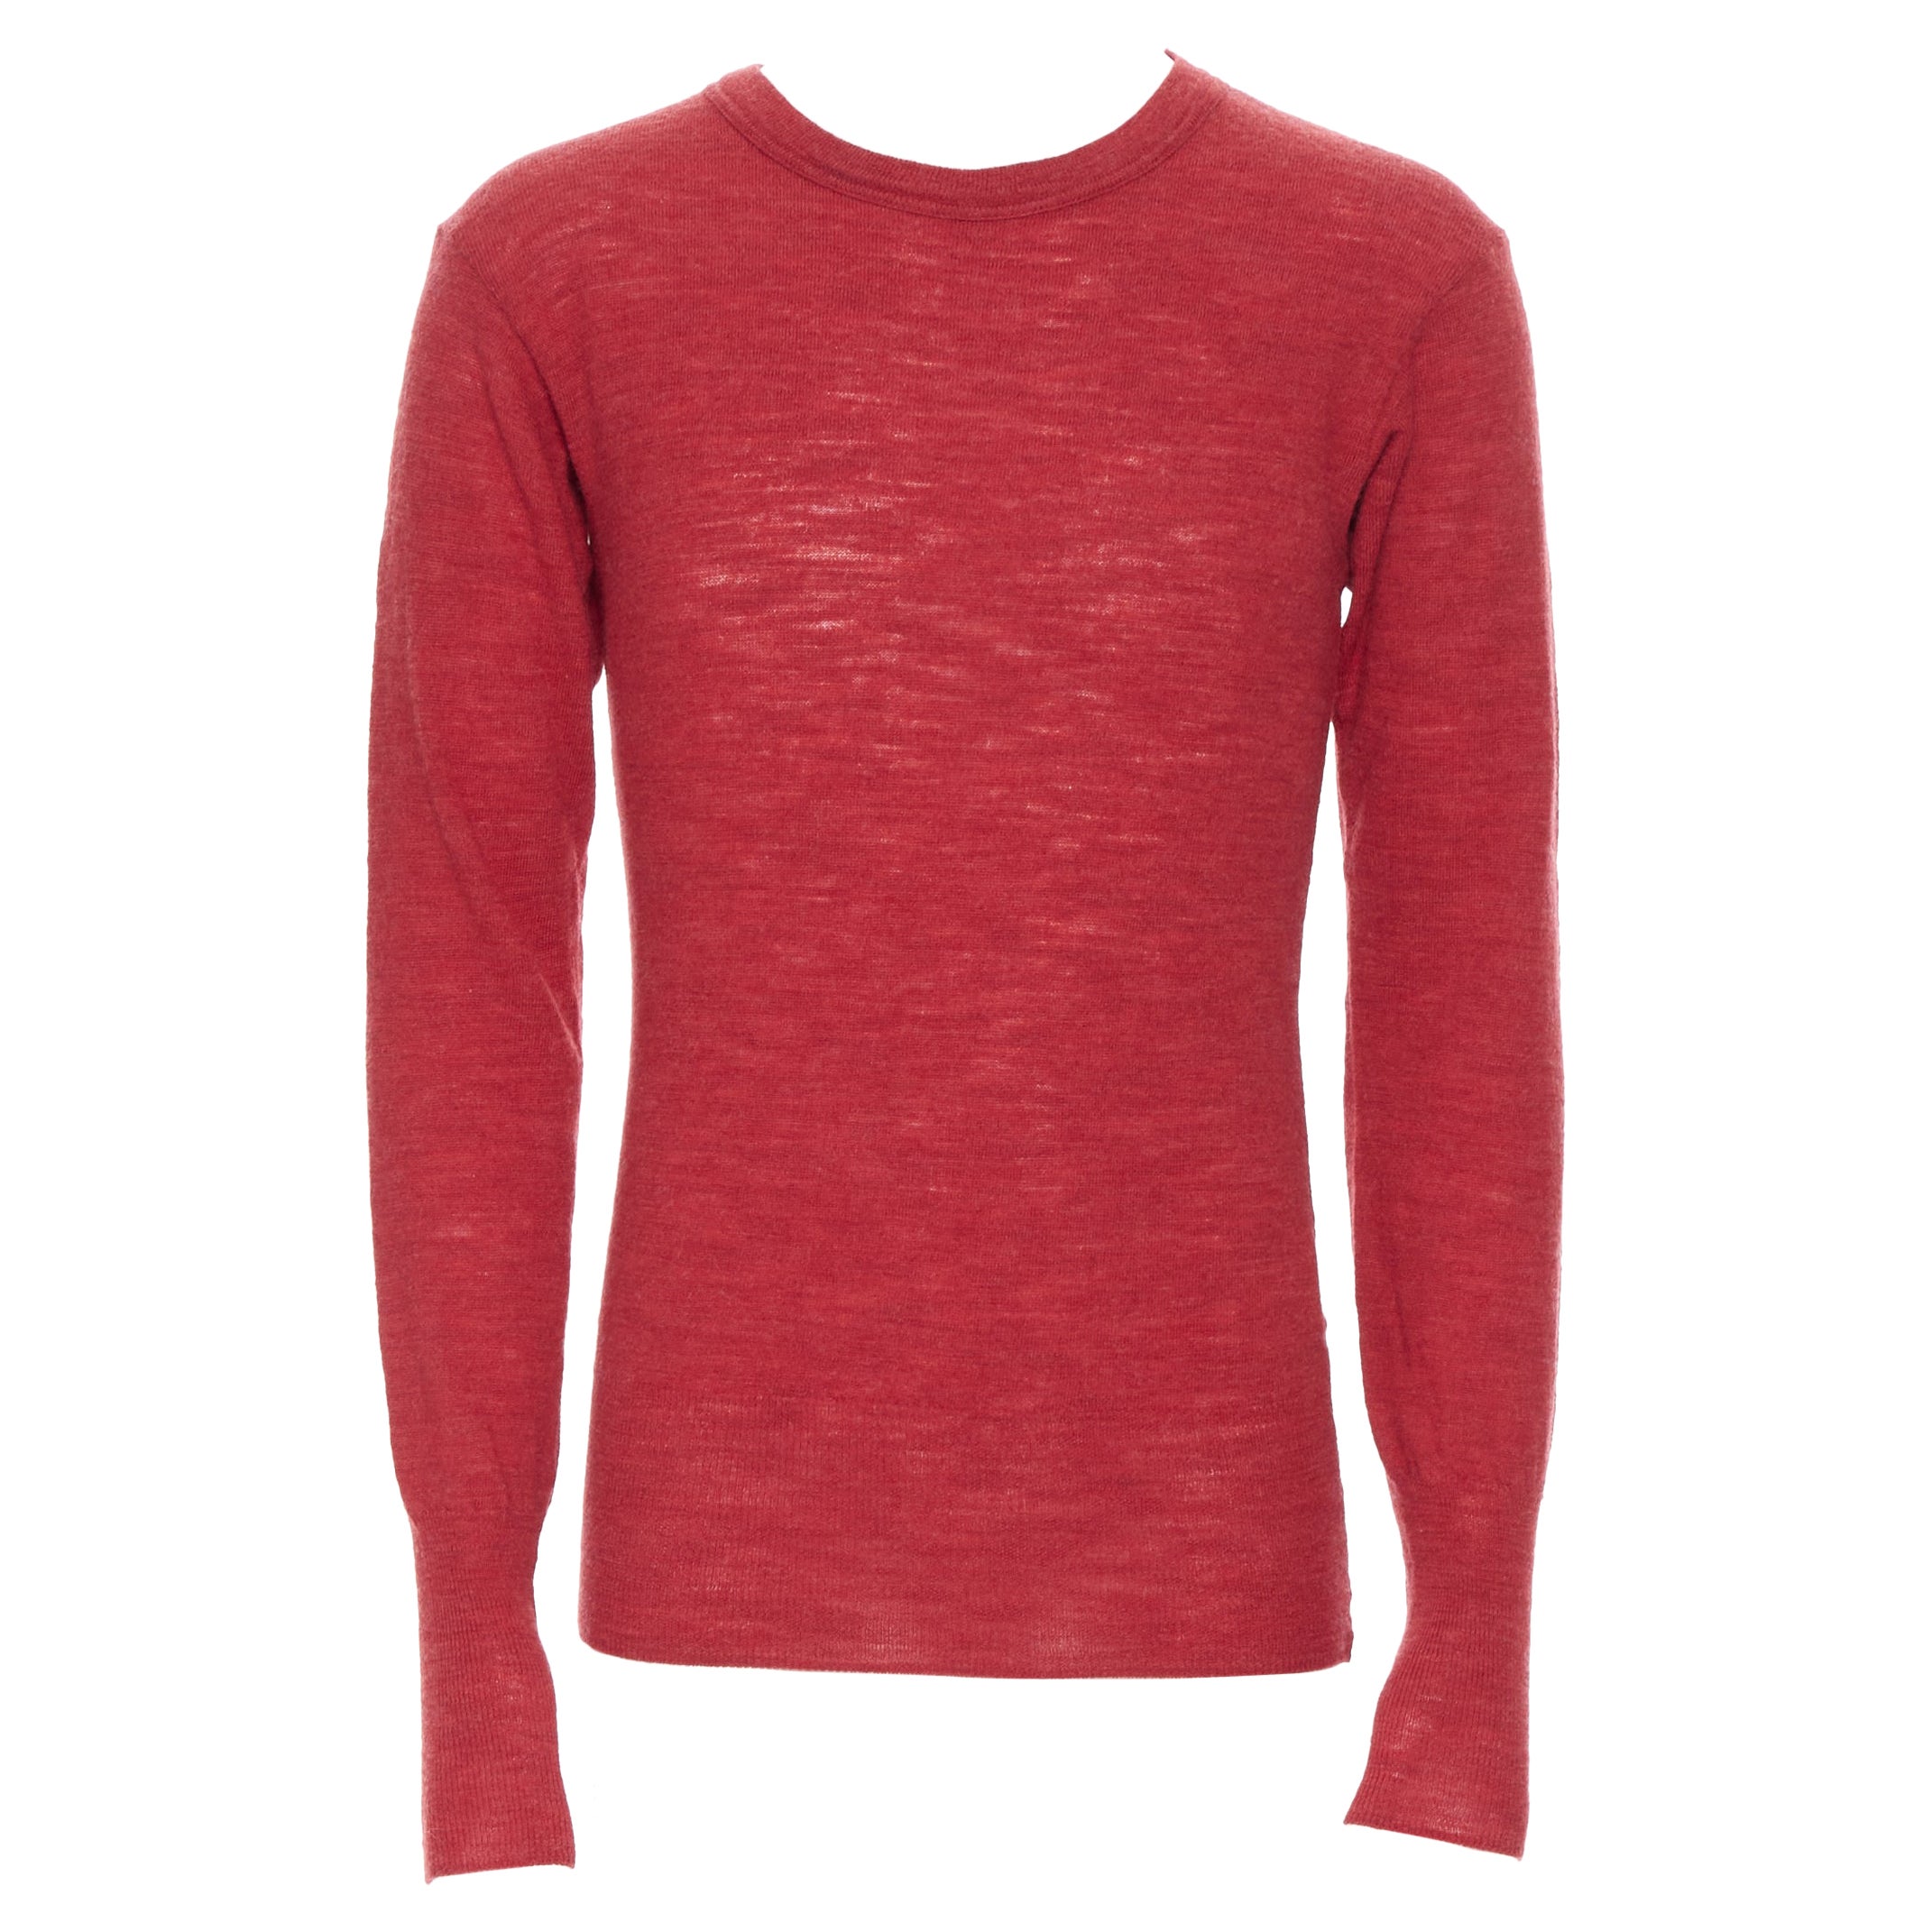 45R 100% wool red crew neck long sleeve pullover sweater Sz 3 M For Sale